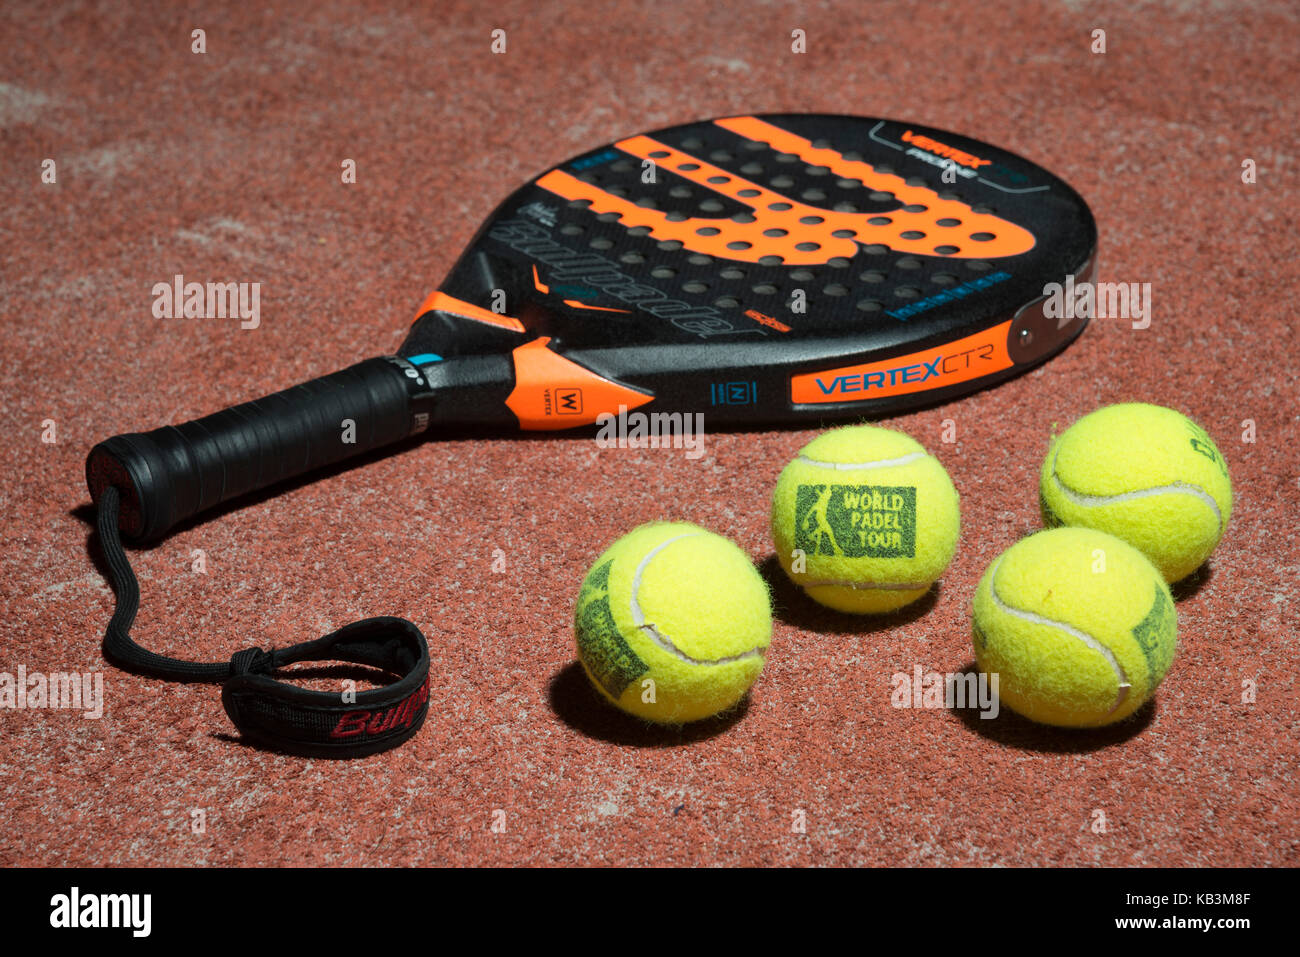 Padel tennis racket and balls on a padel field Stock Photo